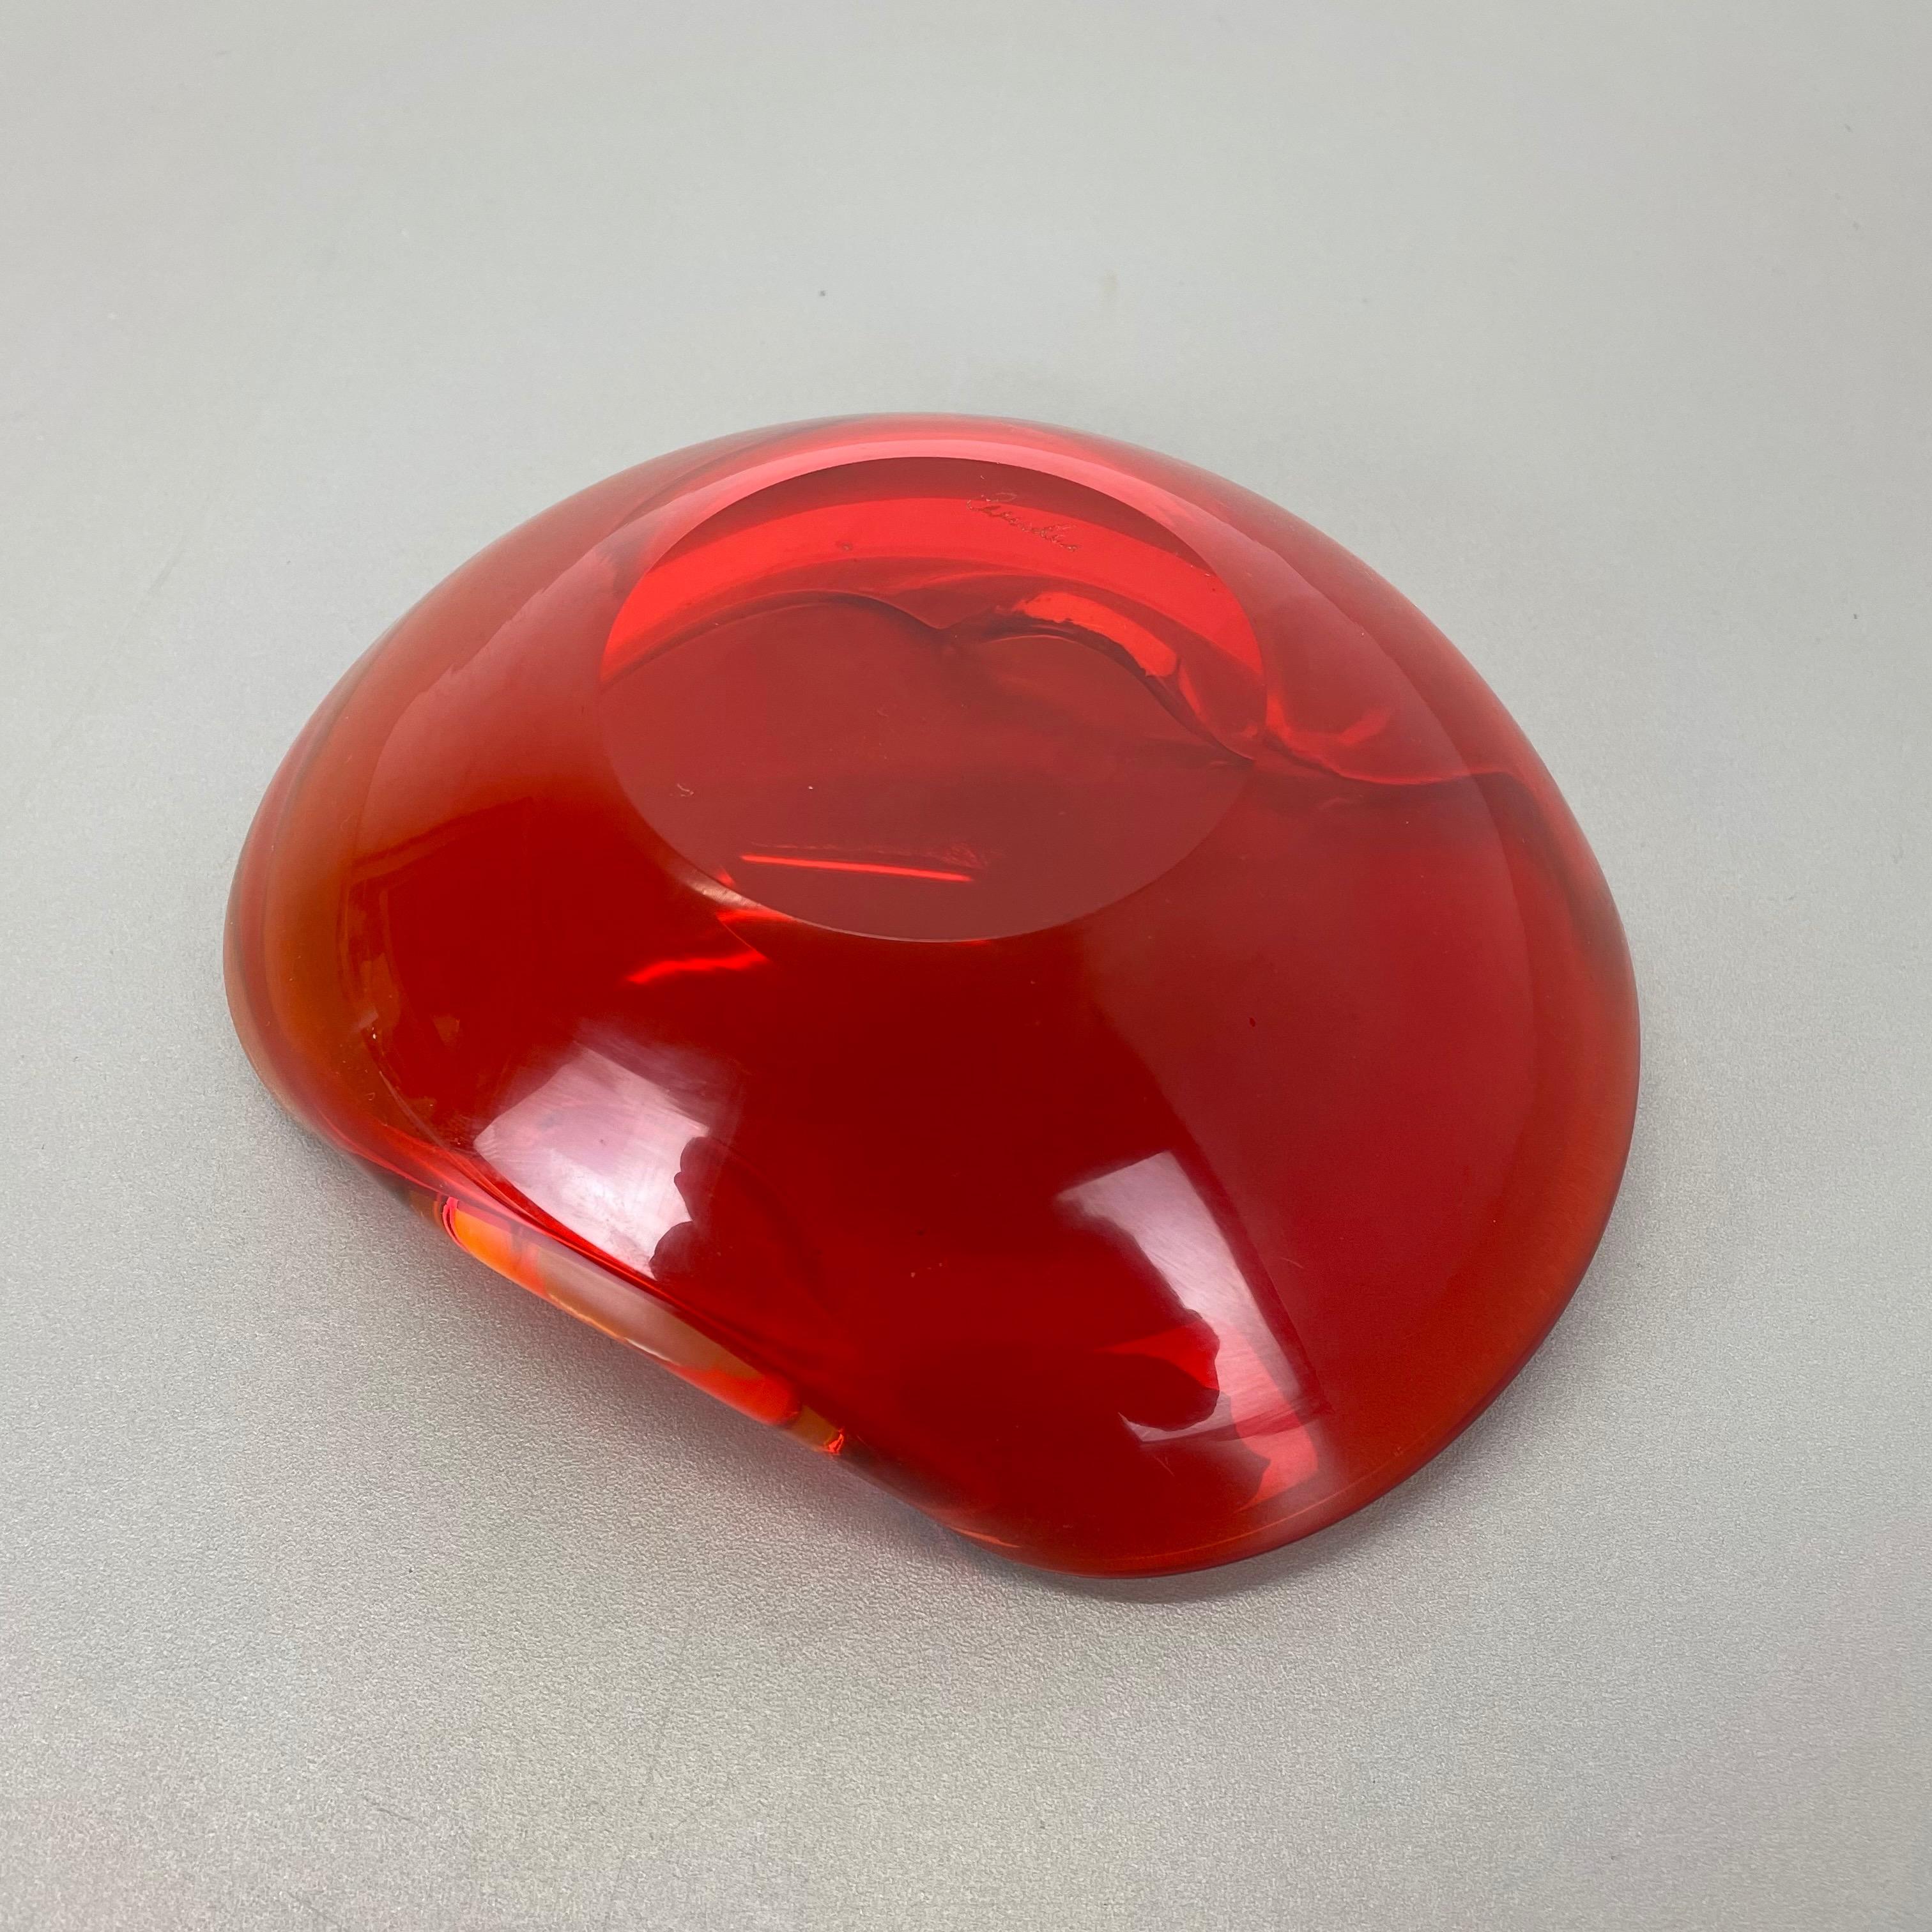 New Old Stock, Murano Red Glass Shell Bowl Antonio da Ros, Cenedese Italy, 1960s 7